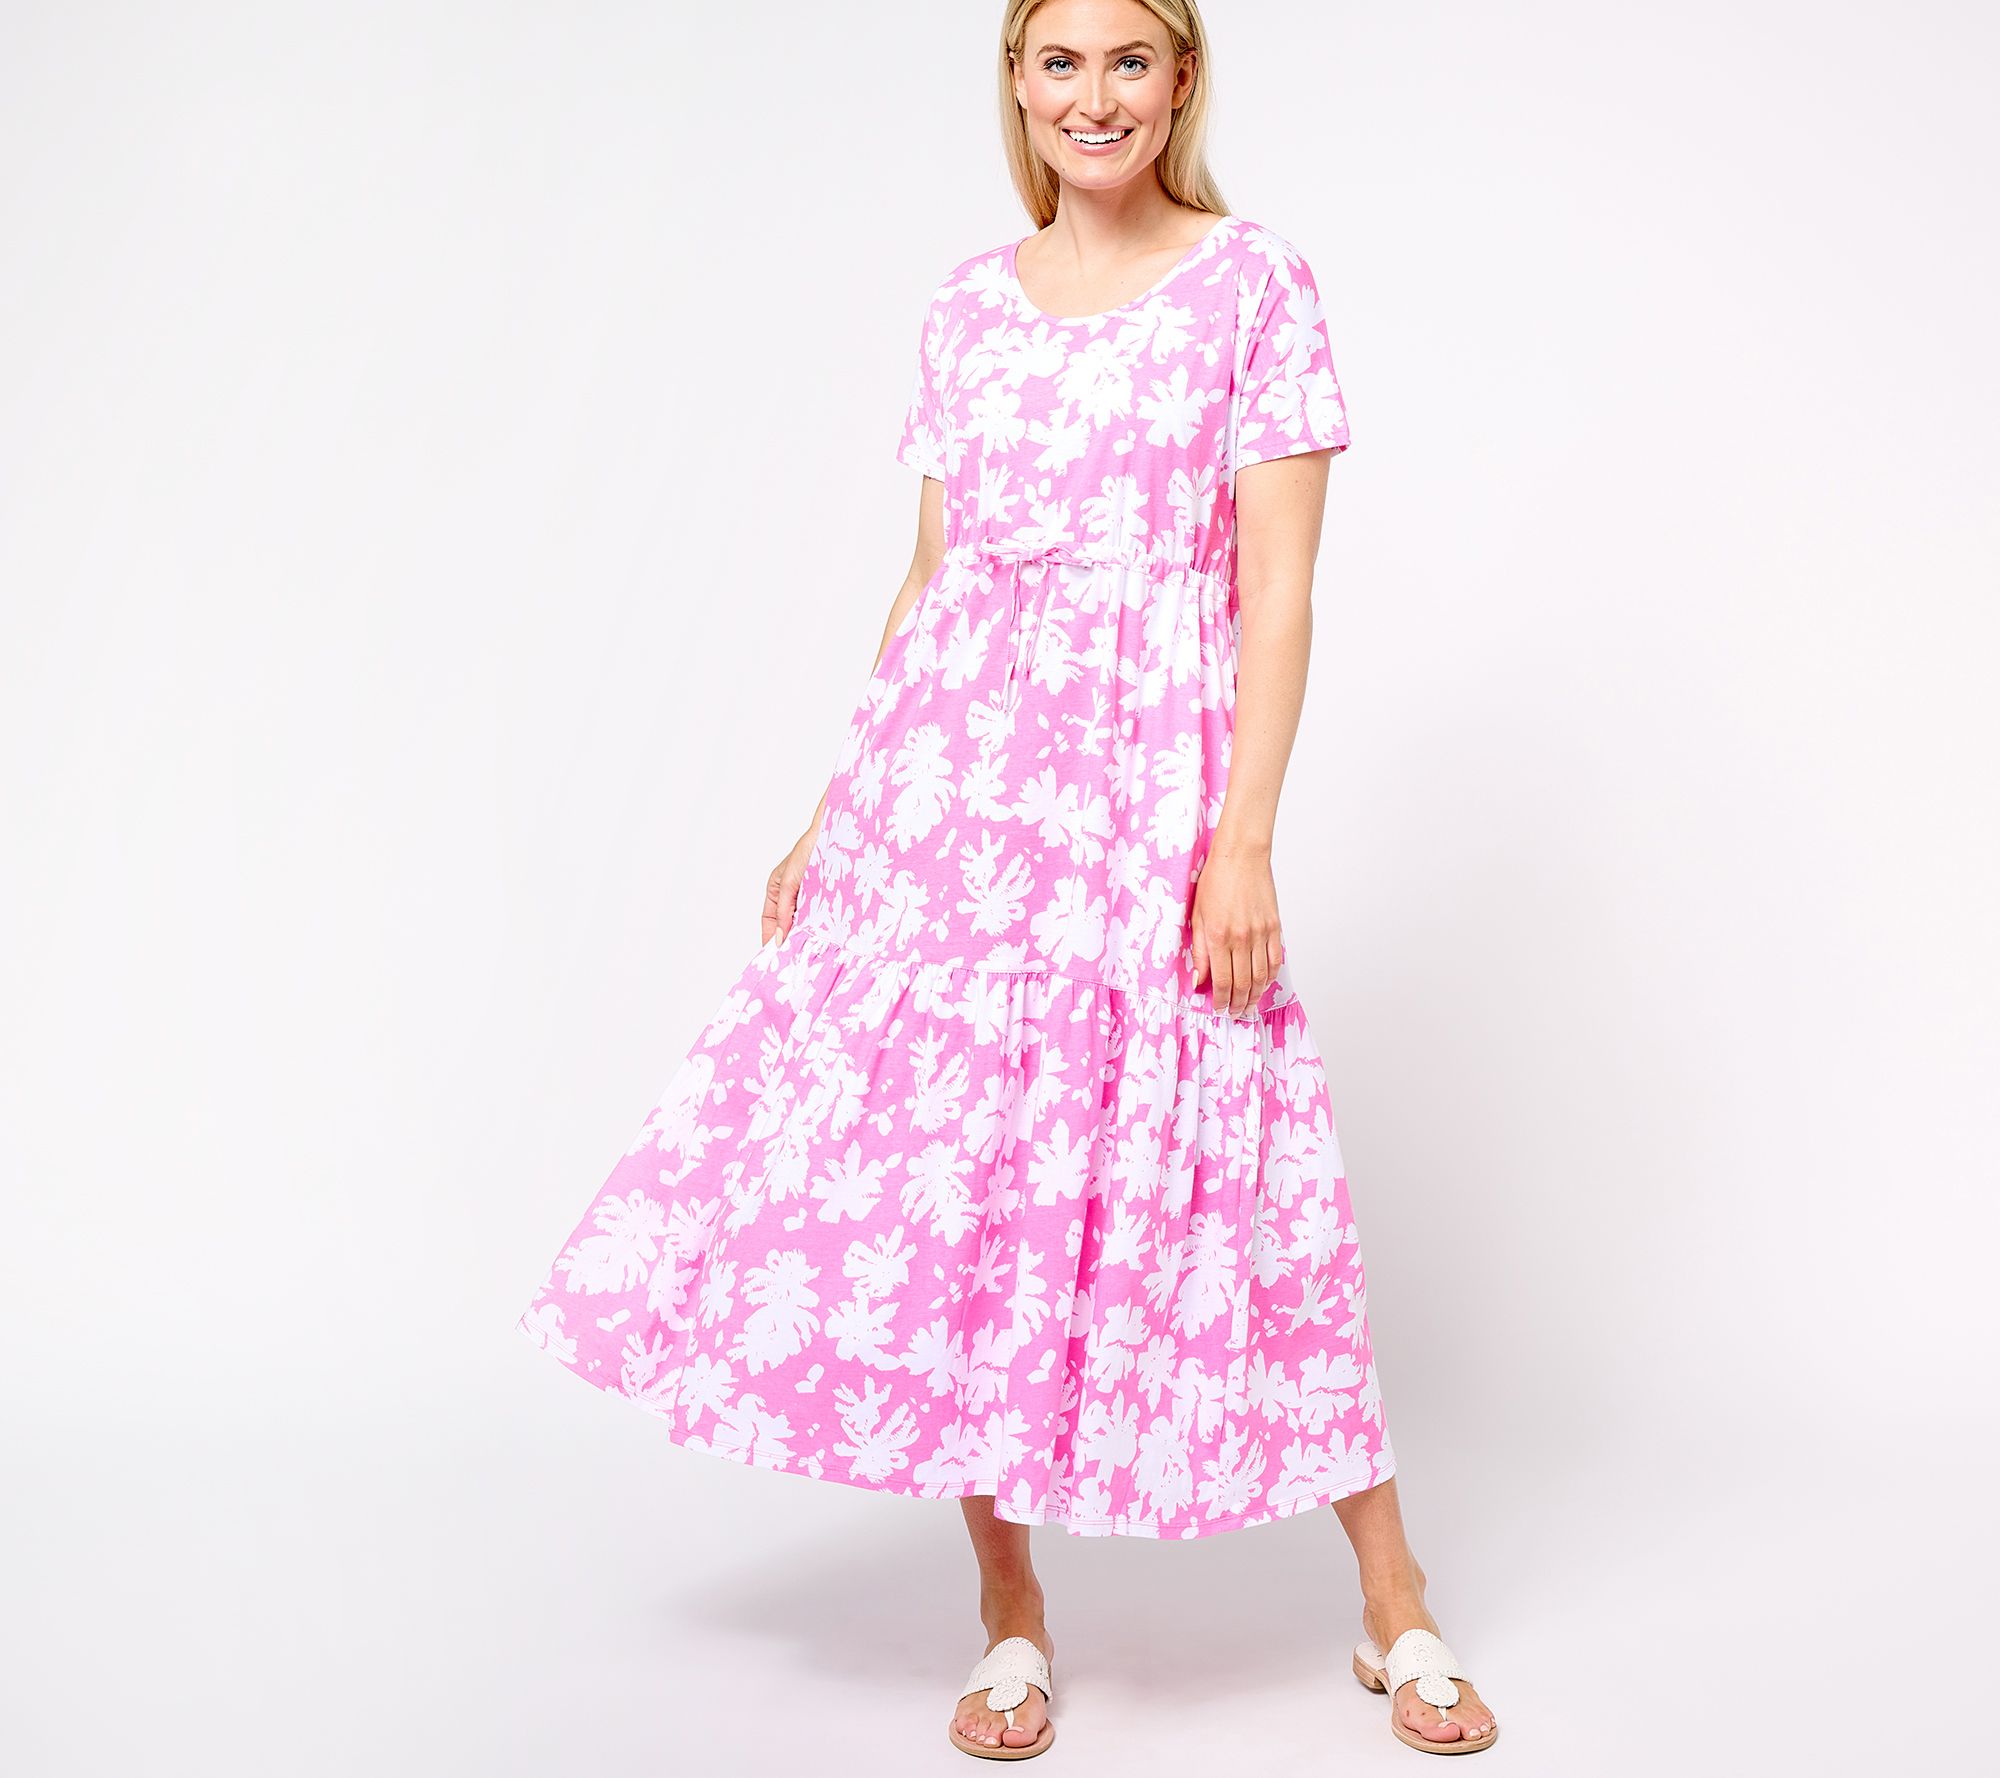 Bunch of Happiness Cotton Dress